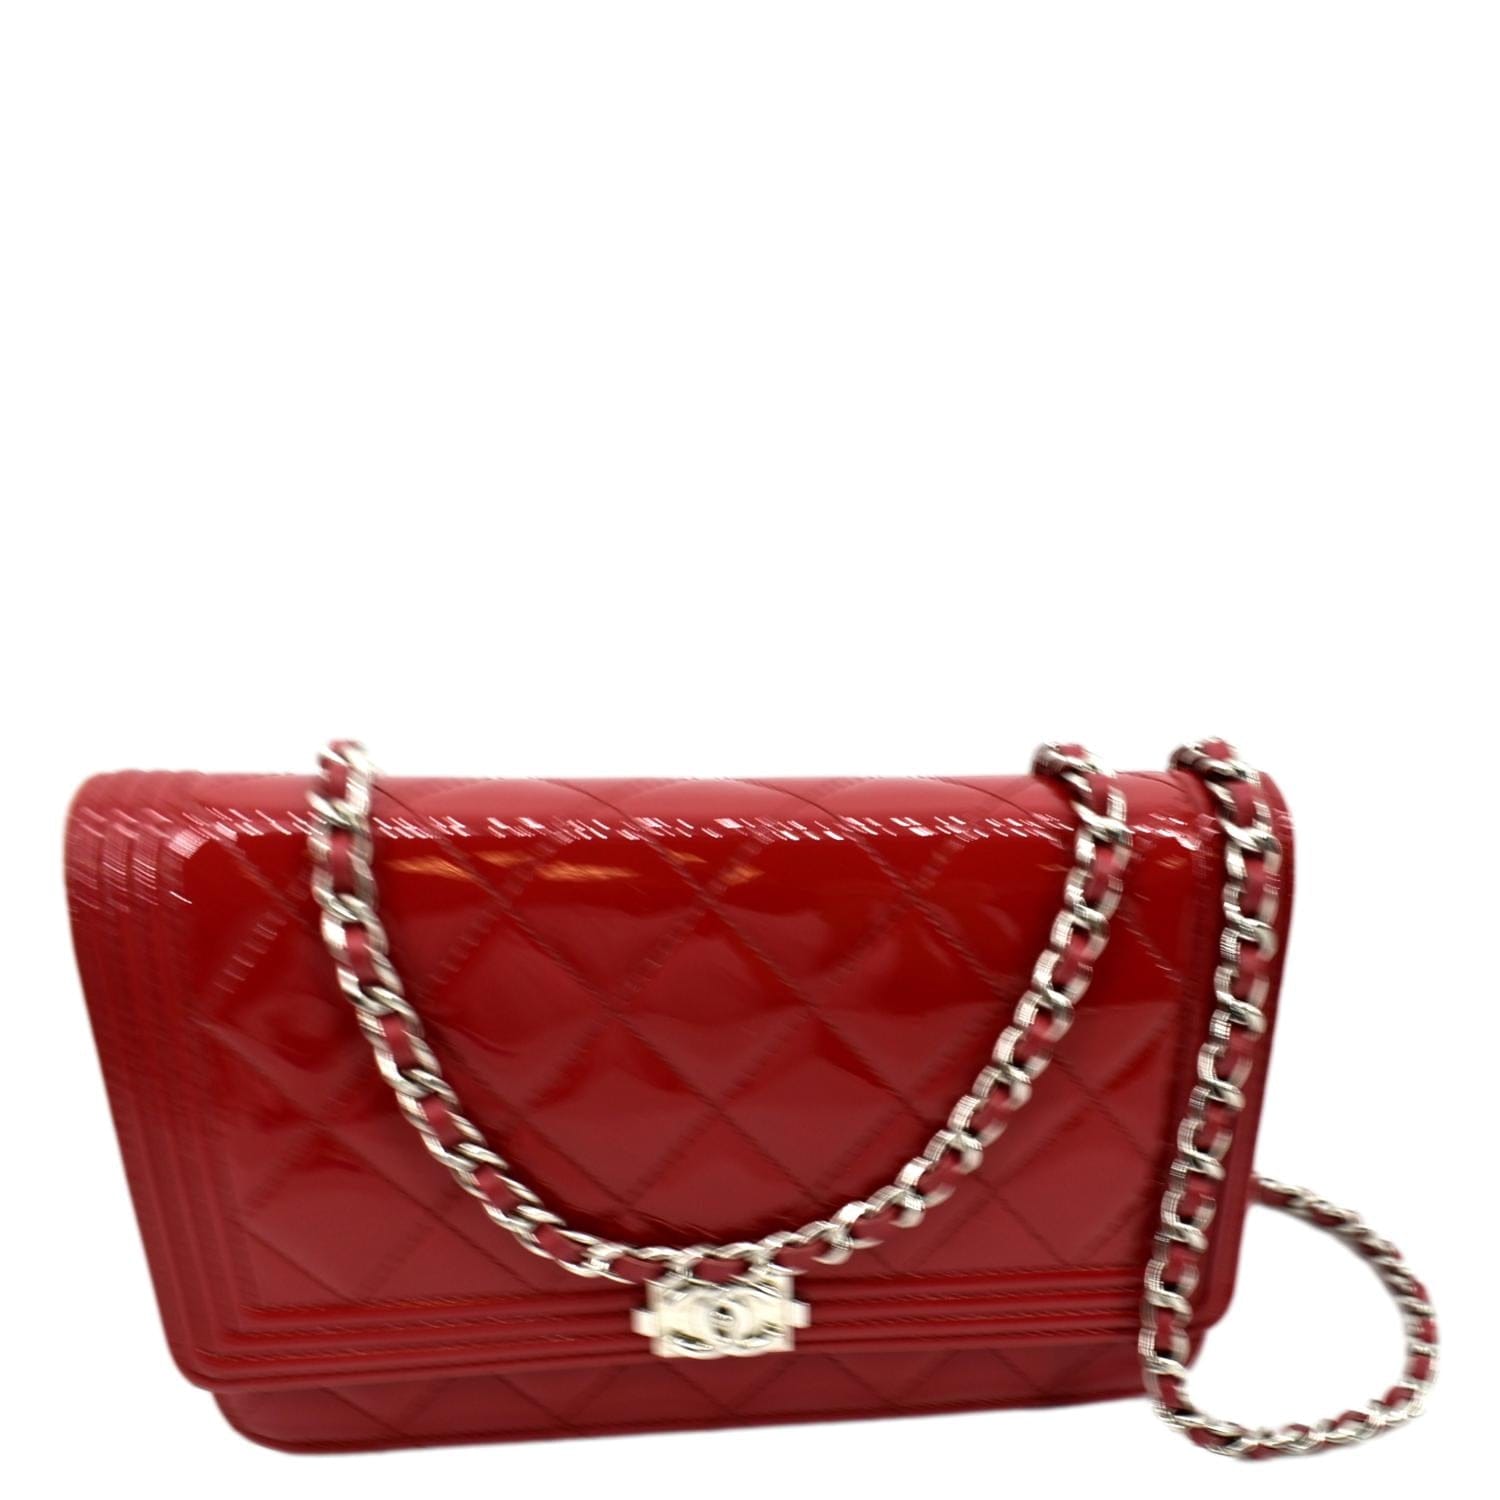 CHANEL Boy Woc Wallet on Chain Quilted Patent Leather Shoulder Bag Red